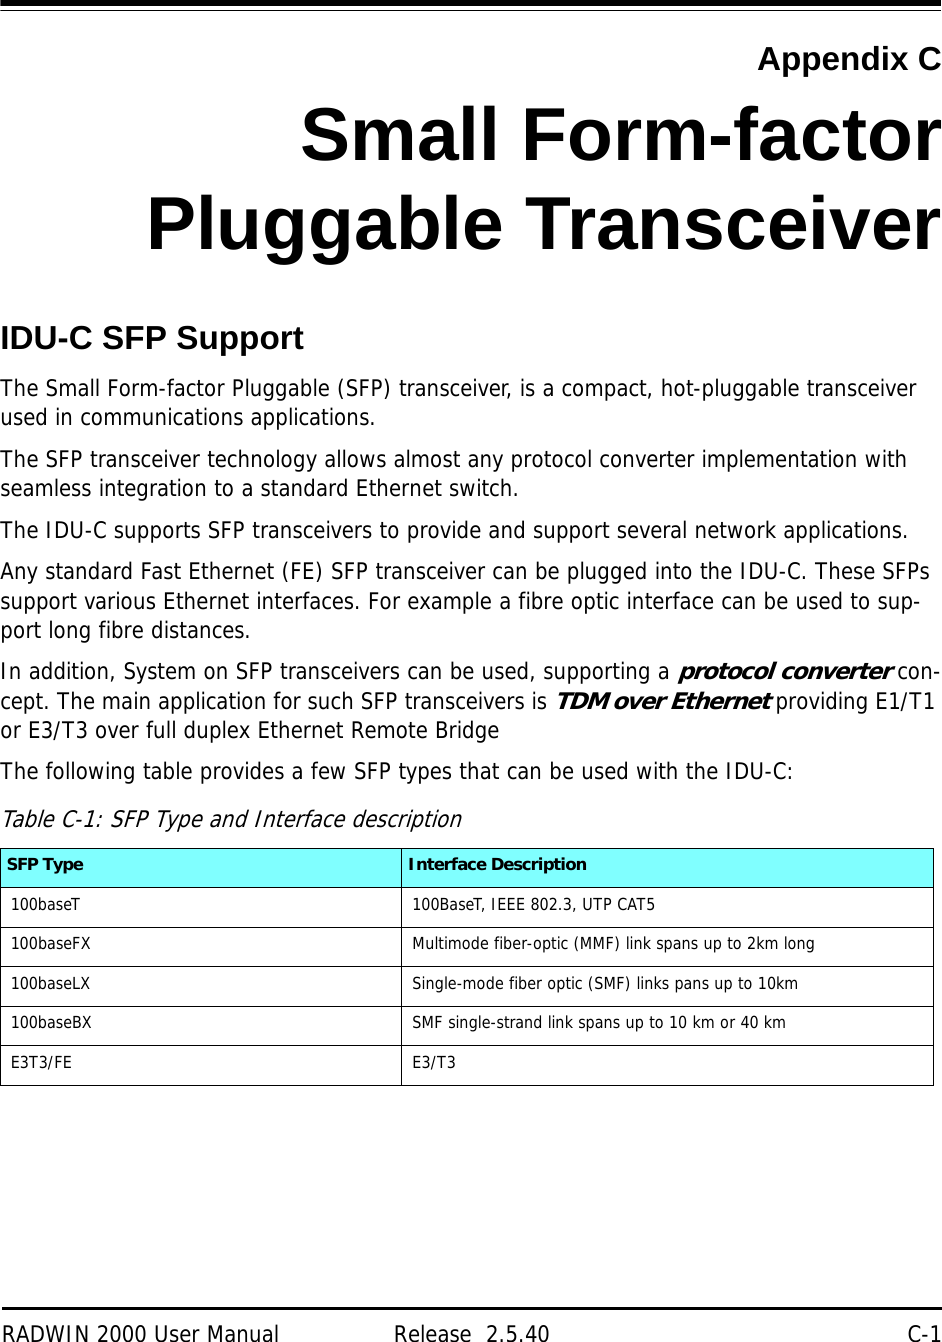 RADWIN 2000 User Manual Release  2.5.40 C-1Appendix CSmall Form-factorPluggable TransceiverIDU-C SFP SupportThe Small Form-factor Pluggable (SFP) transceiver, is a compact, hot-pluggable transceiver used in communications applications.The SFP transceiver technology allows almost any protocol converter implementation with seamless integration to a standard Ethernet switch.The IDU-C supports SFP transceivers to provide and support several network applications.Any standard Fast Ethernet (FE) SFP transceiver can be plugged into the IDU-C. These SFPs support various Ethernet interfaces. For example a fibre optic interface can be used to sup-port long fibre distances.In addition, System on SFP transceivers can be used, supporting a protocol converter con-cept. The main application for such SFP transceivers is TDM over Ethernet providing E1/T1 or E3/T3 over full duplex Ethernet Remote Bridge The following table provides a few SFP types that can be used with the IDU-C: Table C-1: SFP Type and Interface descriptionSFP Type Interface Description100baseT 100BaseT, IEEE 802.3, UTP CAT5100baseFX Multimode fiber-optic (MMF) link spans up to 2km long 100baseLX Single-mode fiber optic (SMF) links pans up to 10km100baseBX SMF single-strand link spans up to 10 km or 40 kmE3T3/FE E3/T3